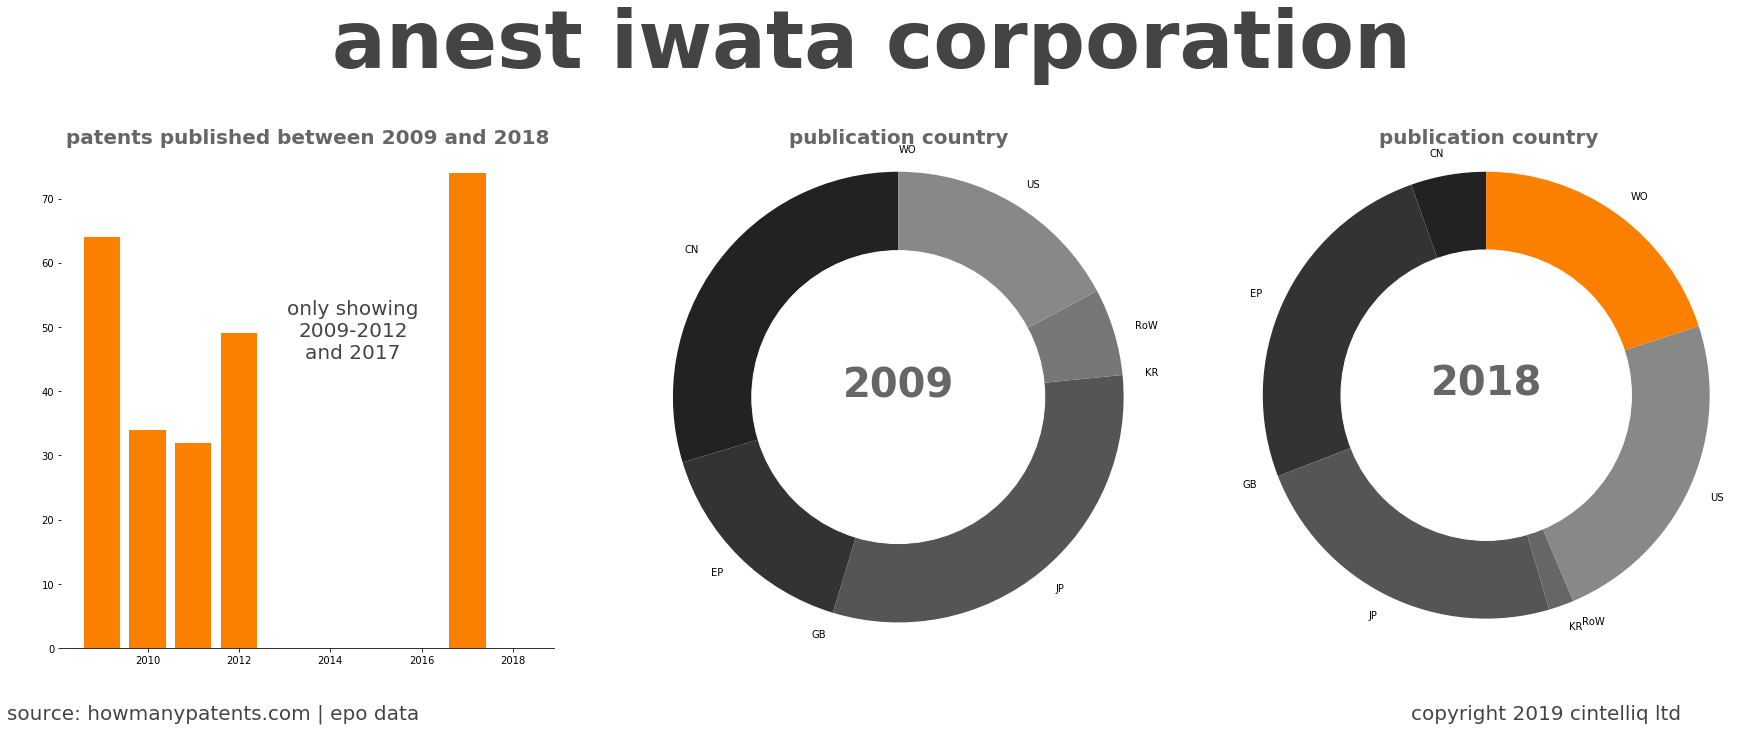 summary of patents for Anest Iwata Corporation